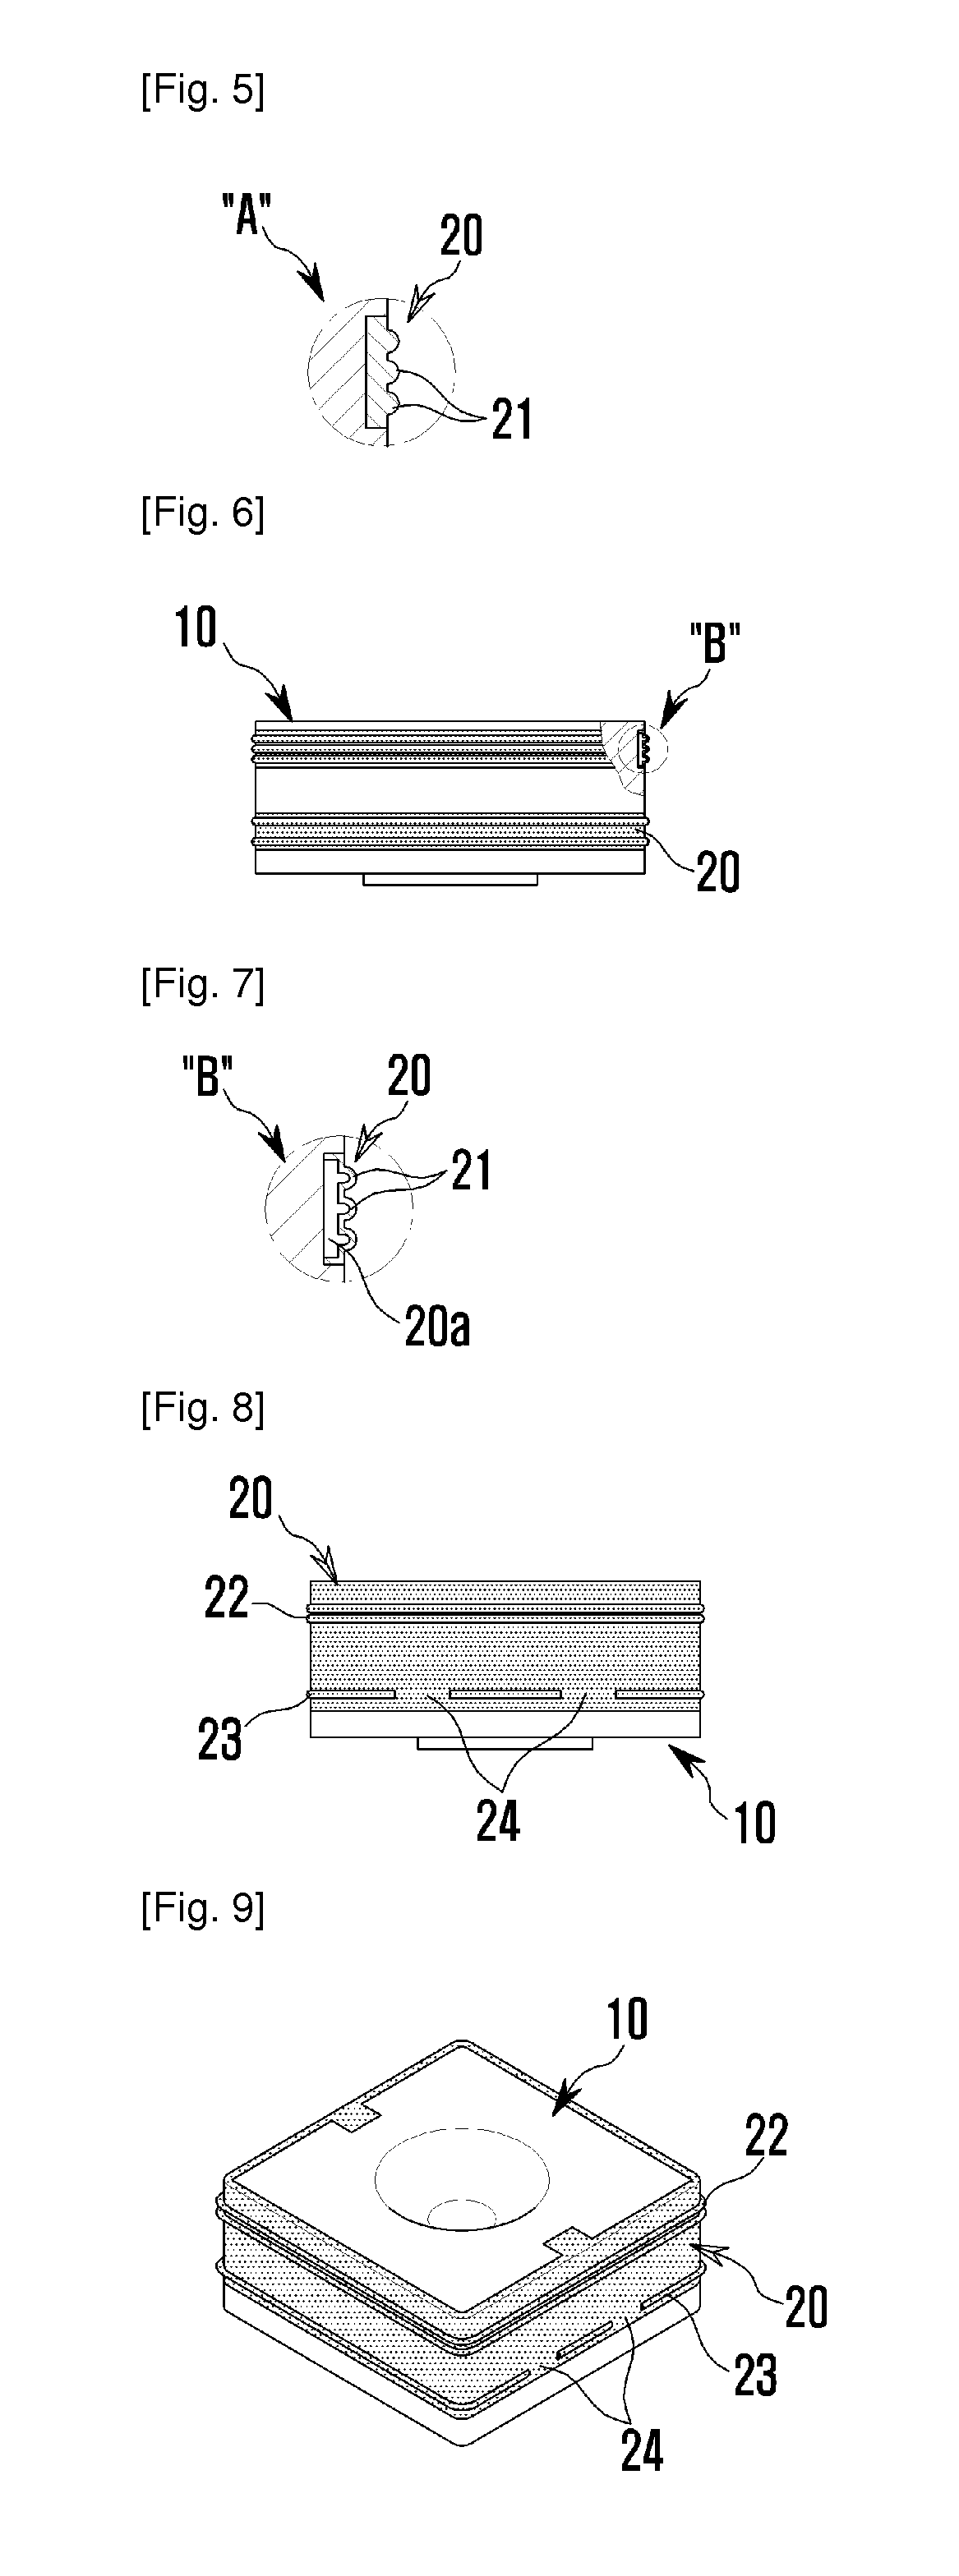 Piston For An Airless-Type Cosmetic Container